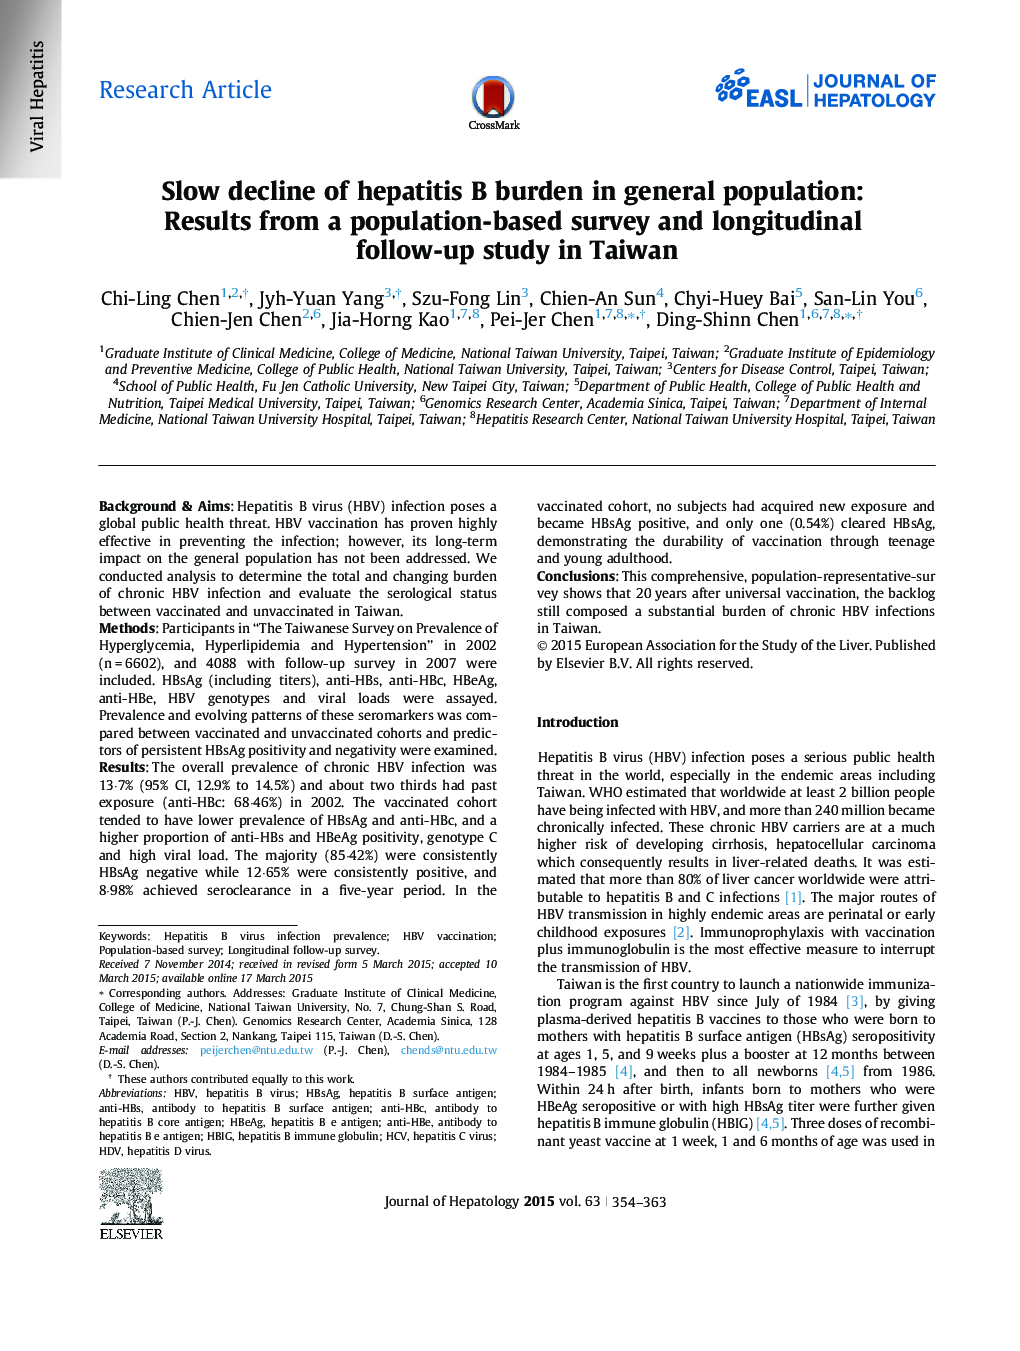 Research ArticleSlow decline of hepatitis B burden in general population: Results from a population-based survey and longitudinal follow-up study in Taiwan